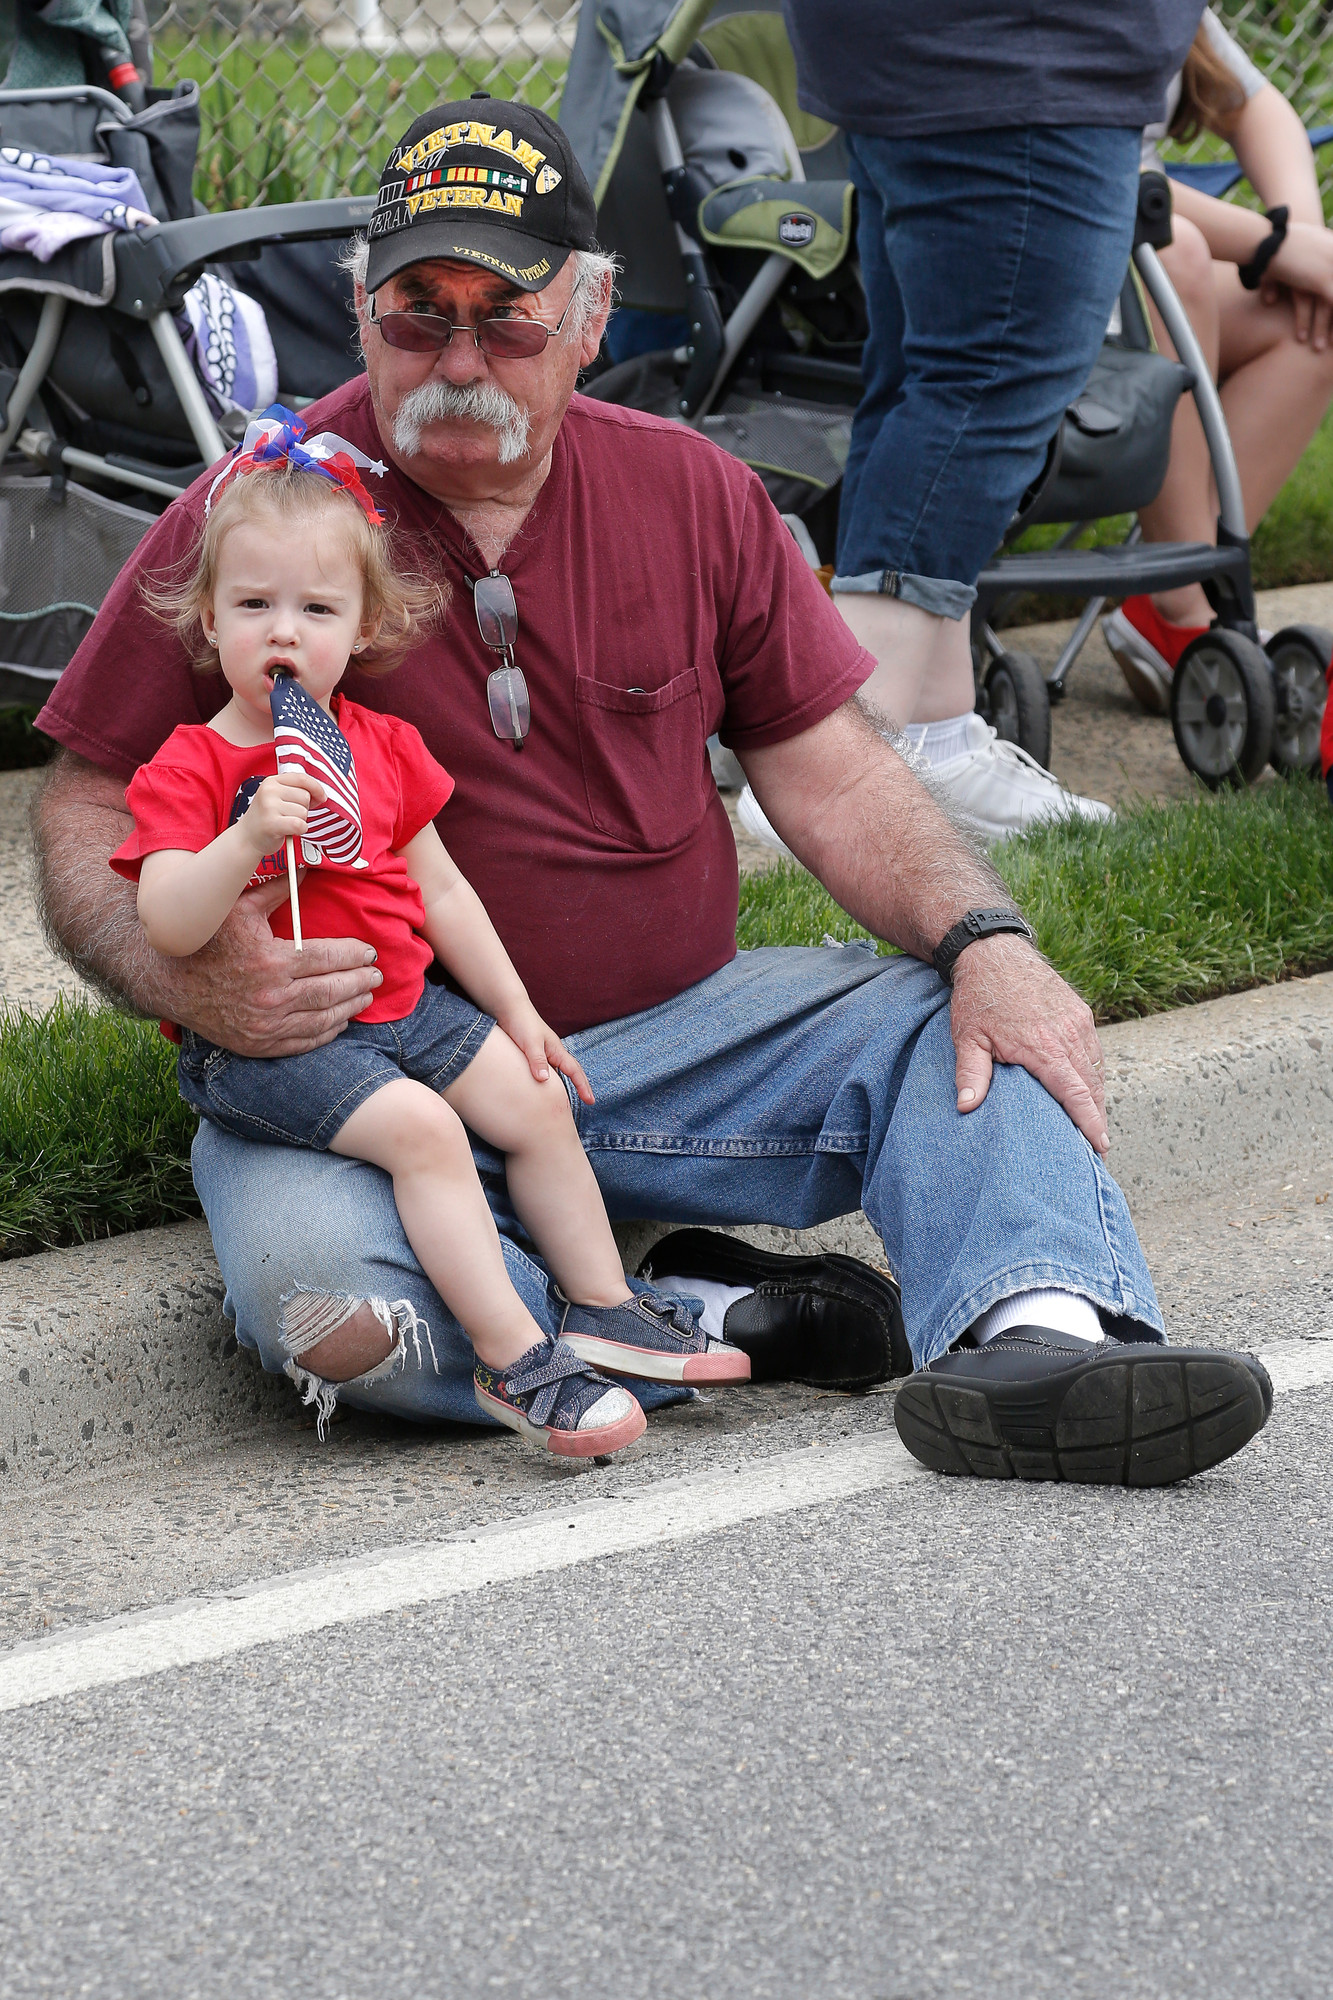 Vietnam veteran John Ochtera and his 16-month old granddaughter Lauren watch the procession from their curbside spot on Prospect Avenue.